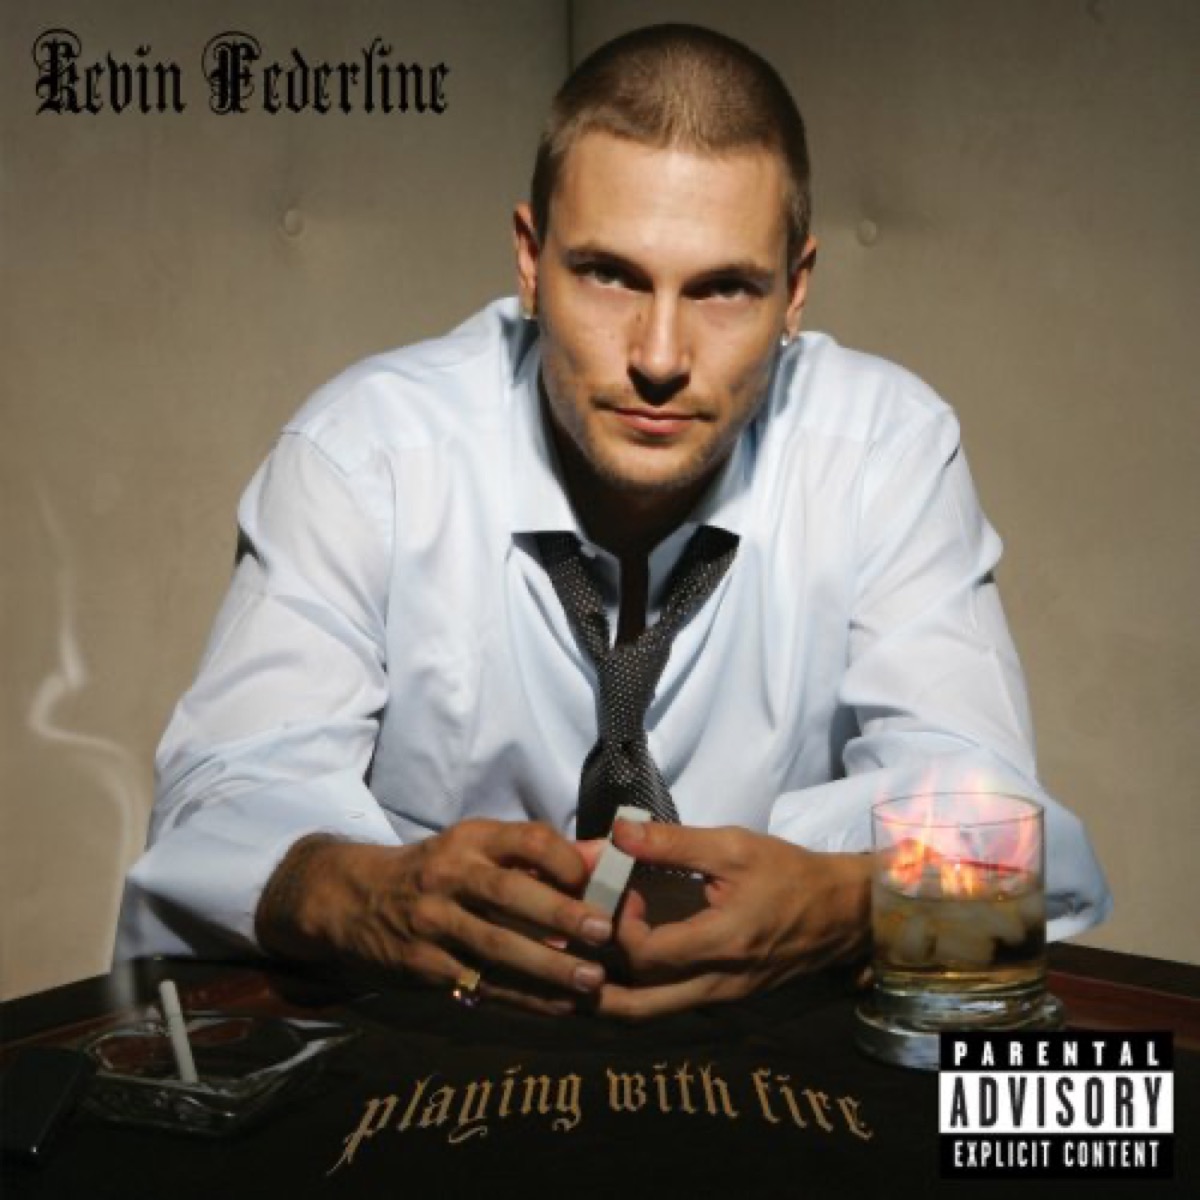 Album cover of "Playing with Fire" by Kevin Federline